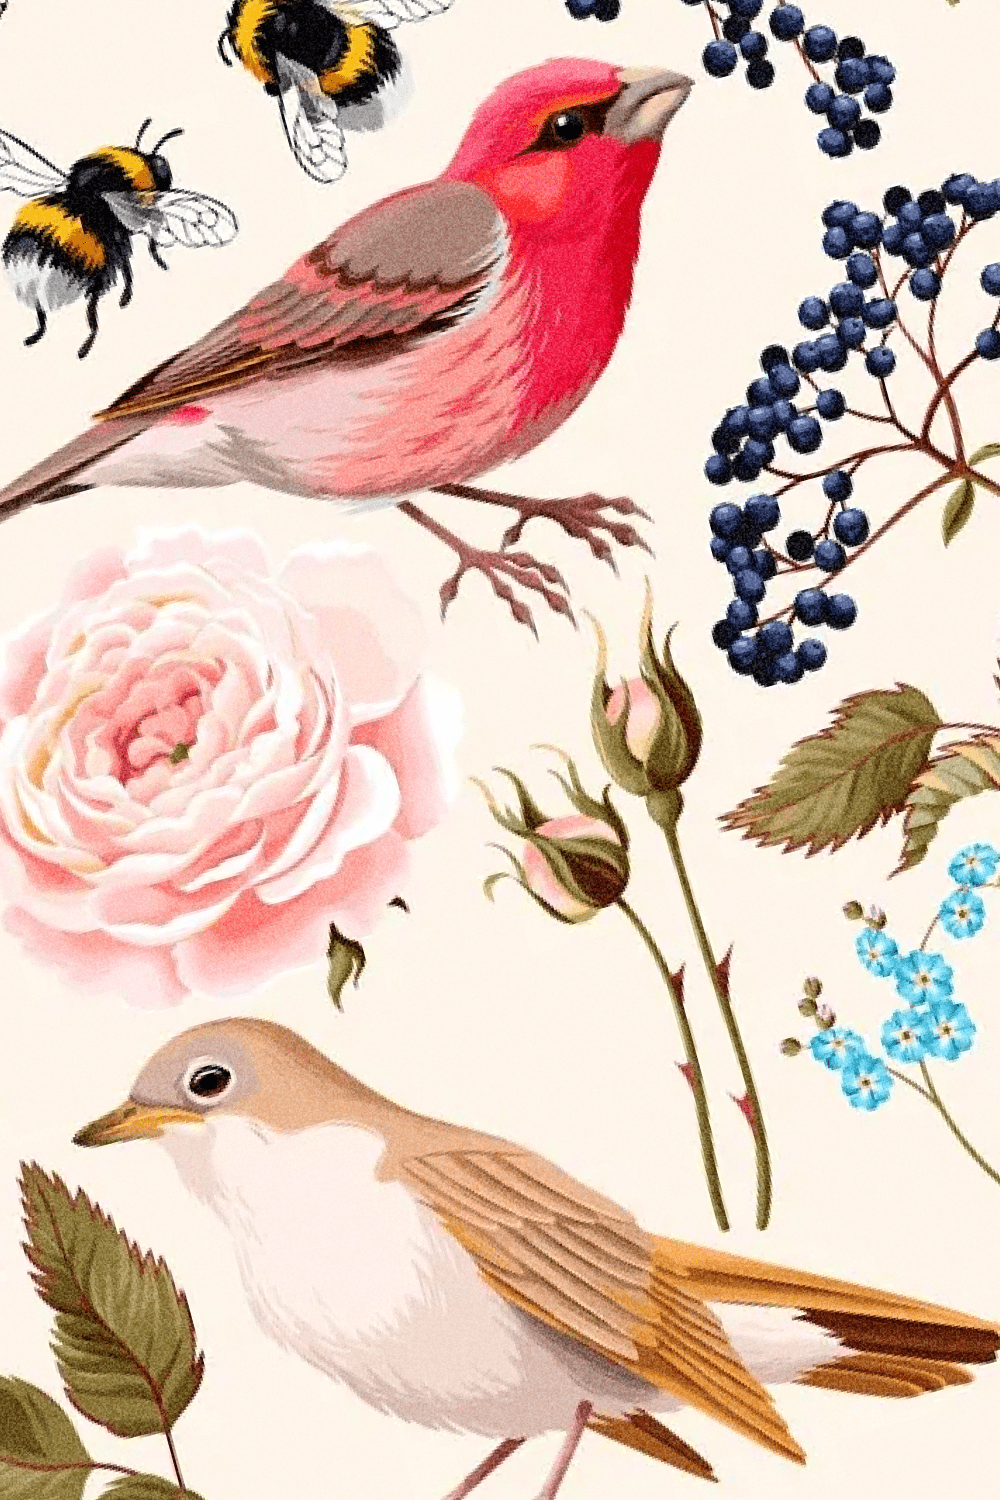 Luxury flowers composition with birds.